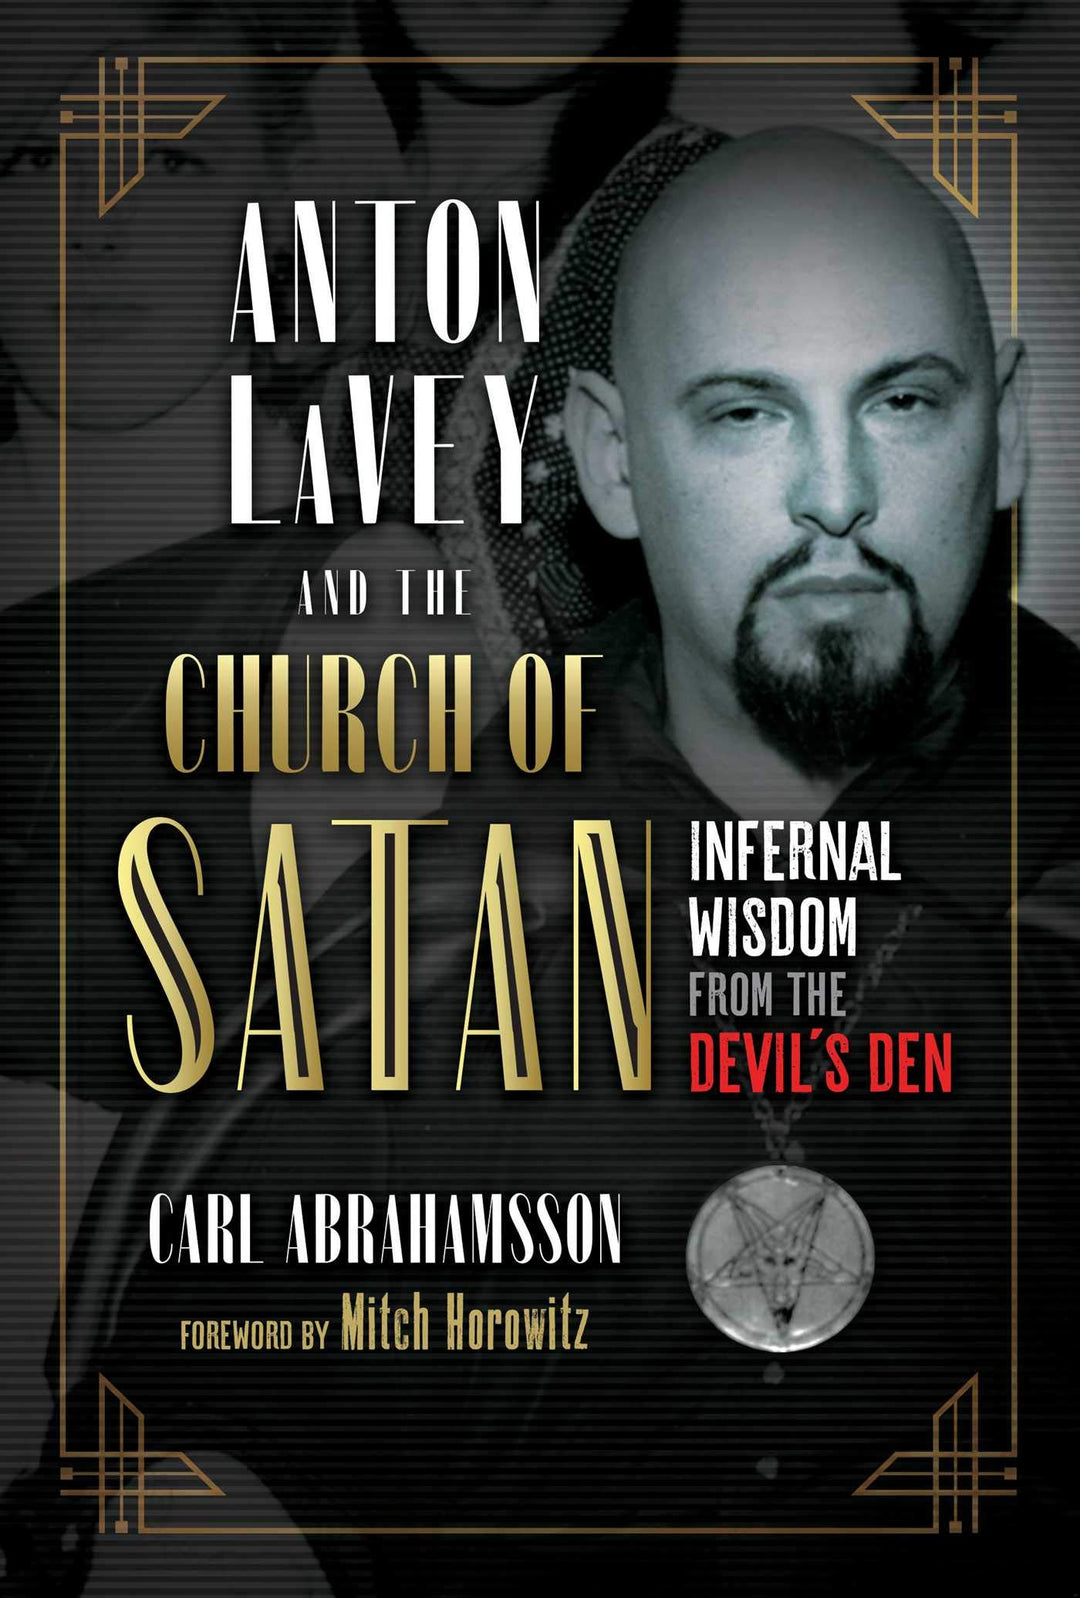 Anton LaVey and the Church of Satan: Infernal Wisdom from the Devil's Den by Carl Abrahamsson